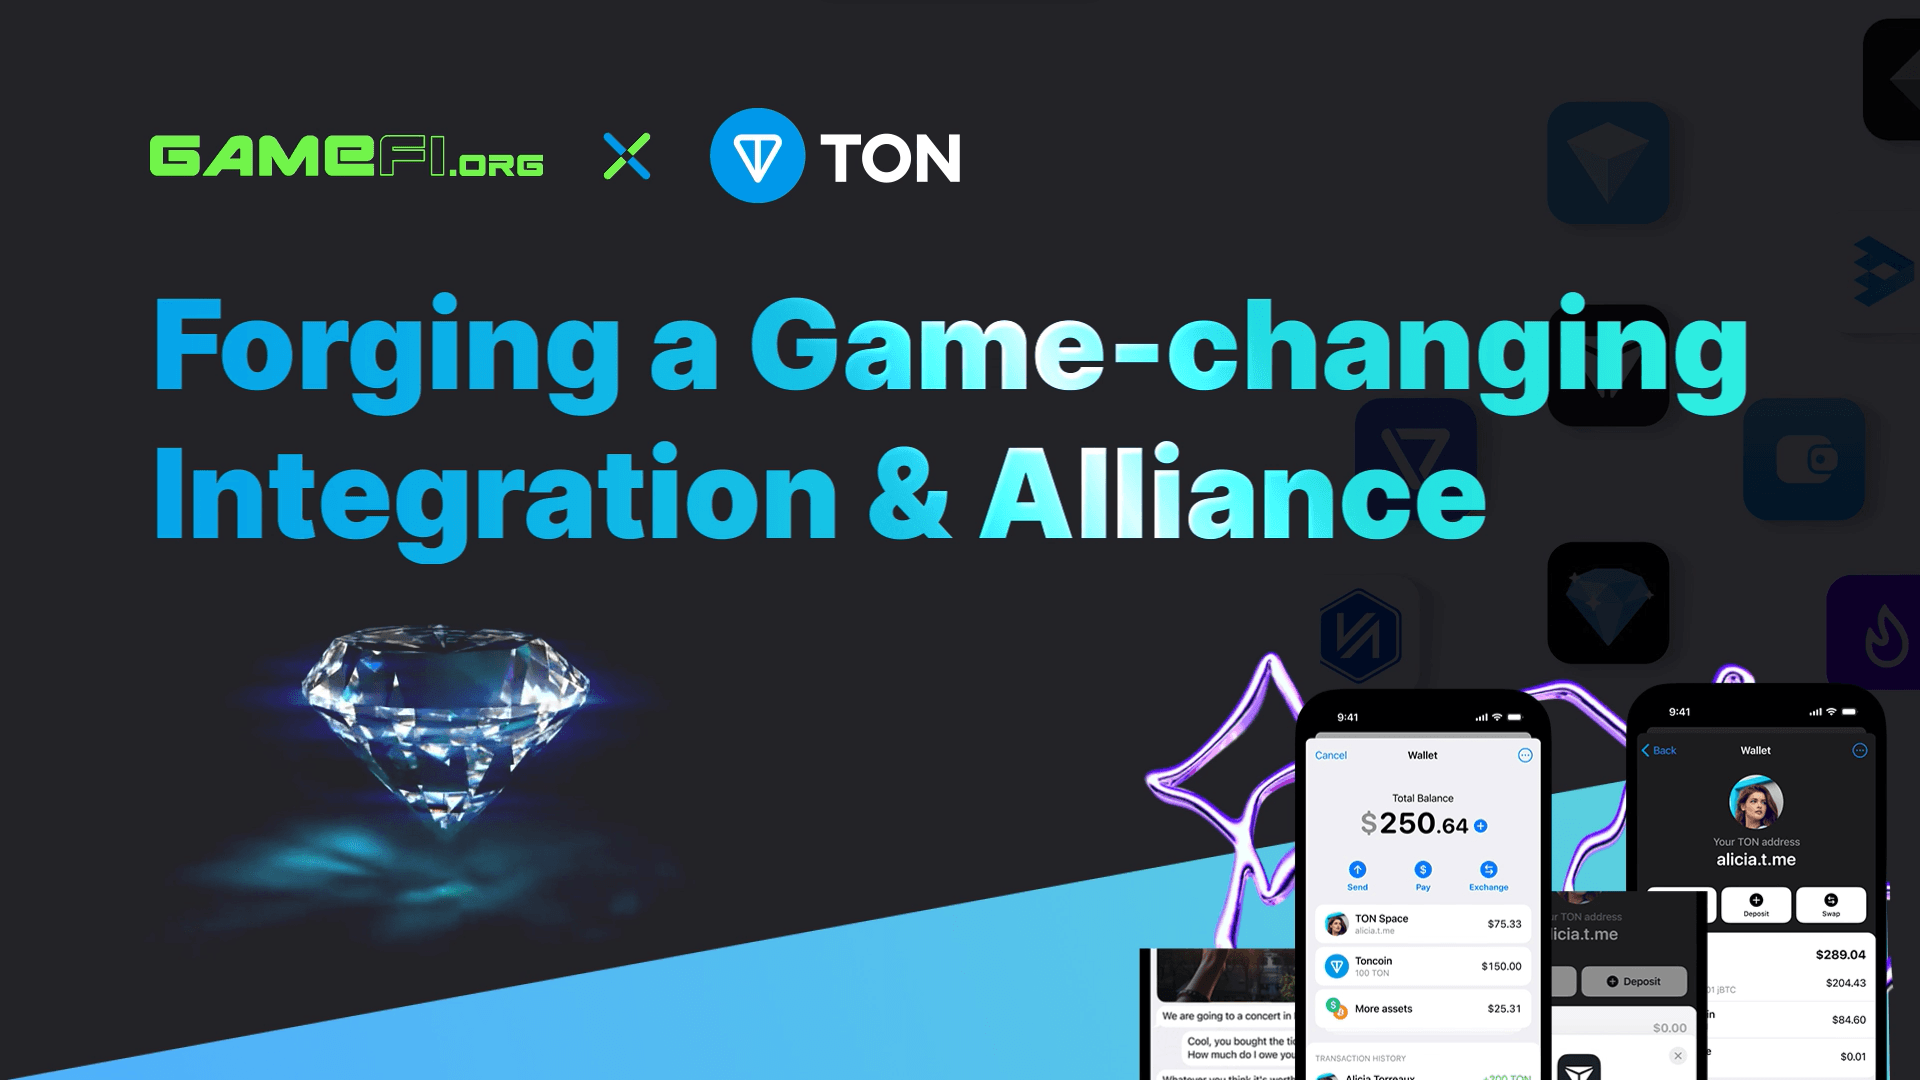 GameFi.org & The Open Network (TON): Forging a Game-changing Integration & Alliance